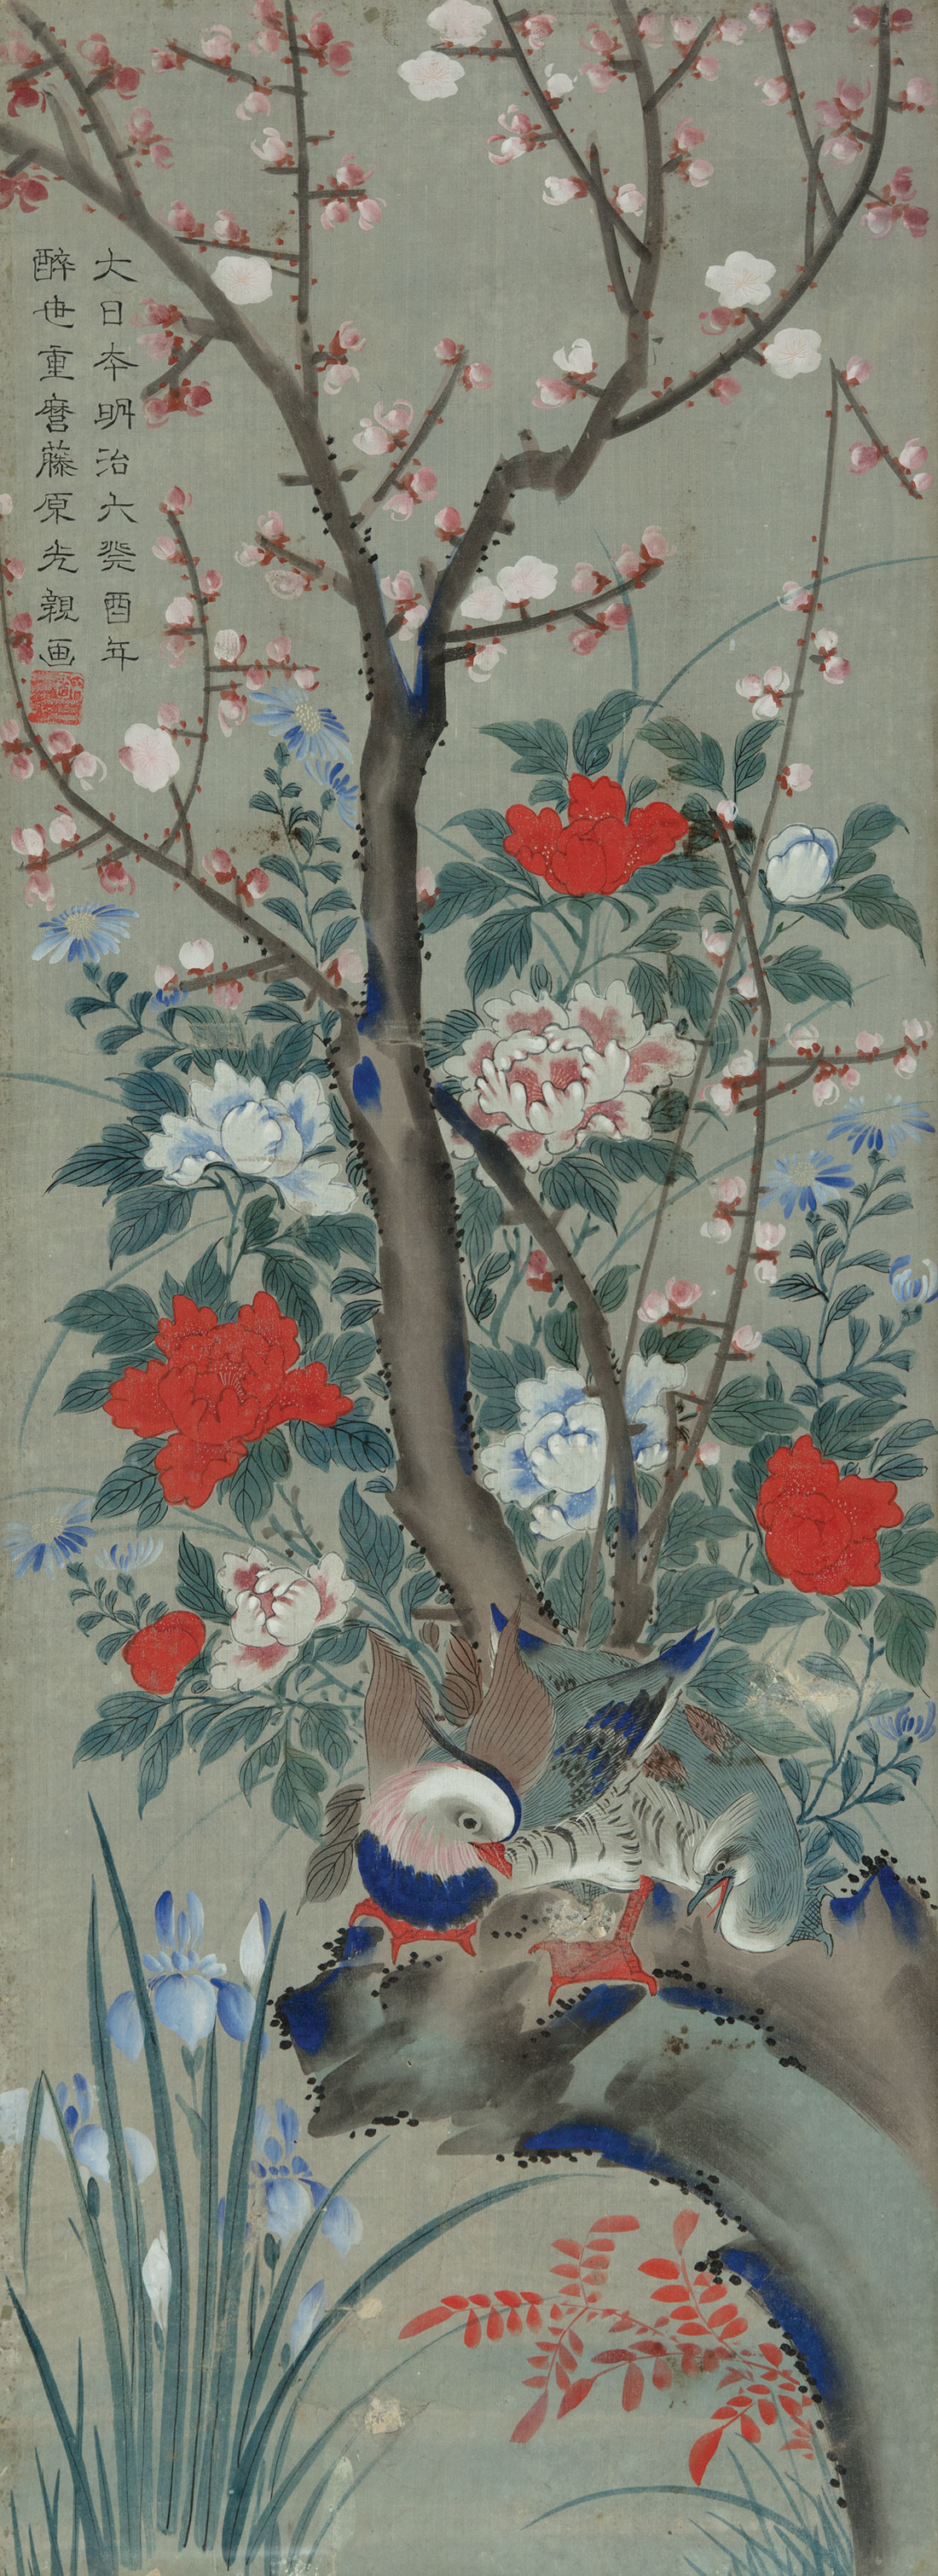 Japanese School, Meiji Period (1868-1912), "Birds and Flowers of the Four Seasons", 4 paintings,